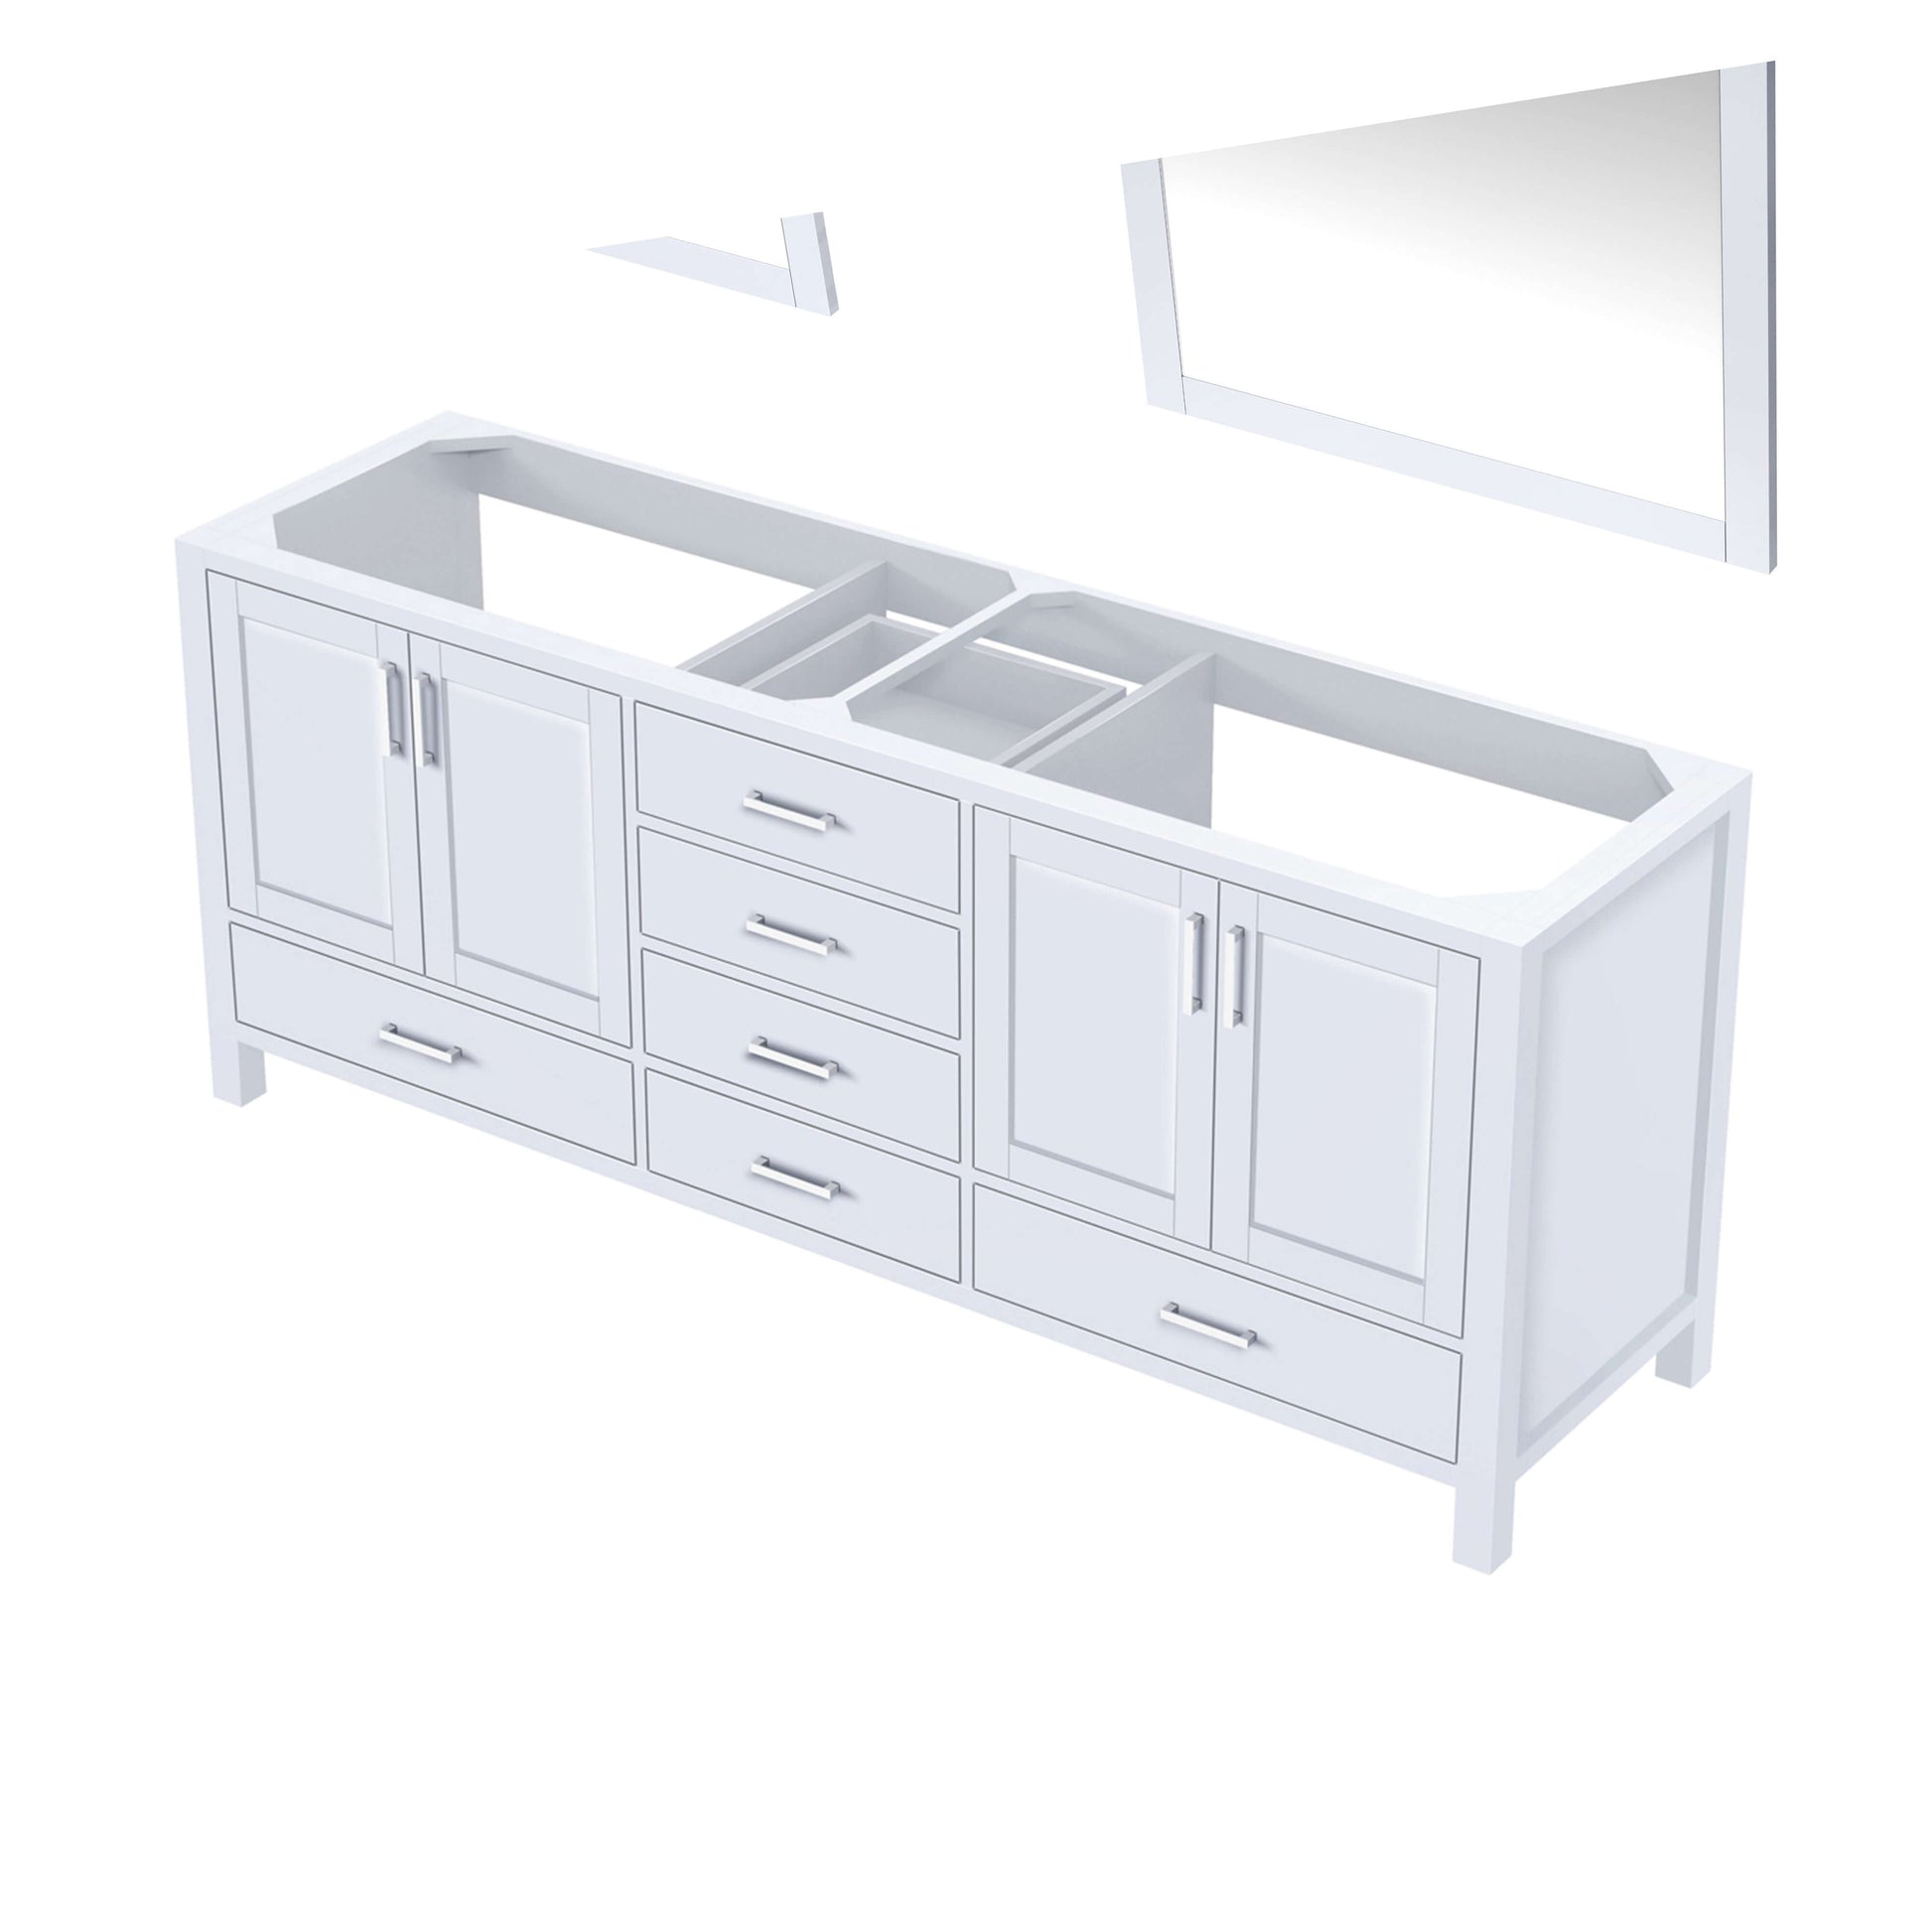 Jacques 80" White Double Vanity, no Top and 30" Mirrors - LJ342280DA00M30